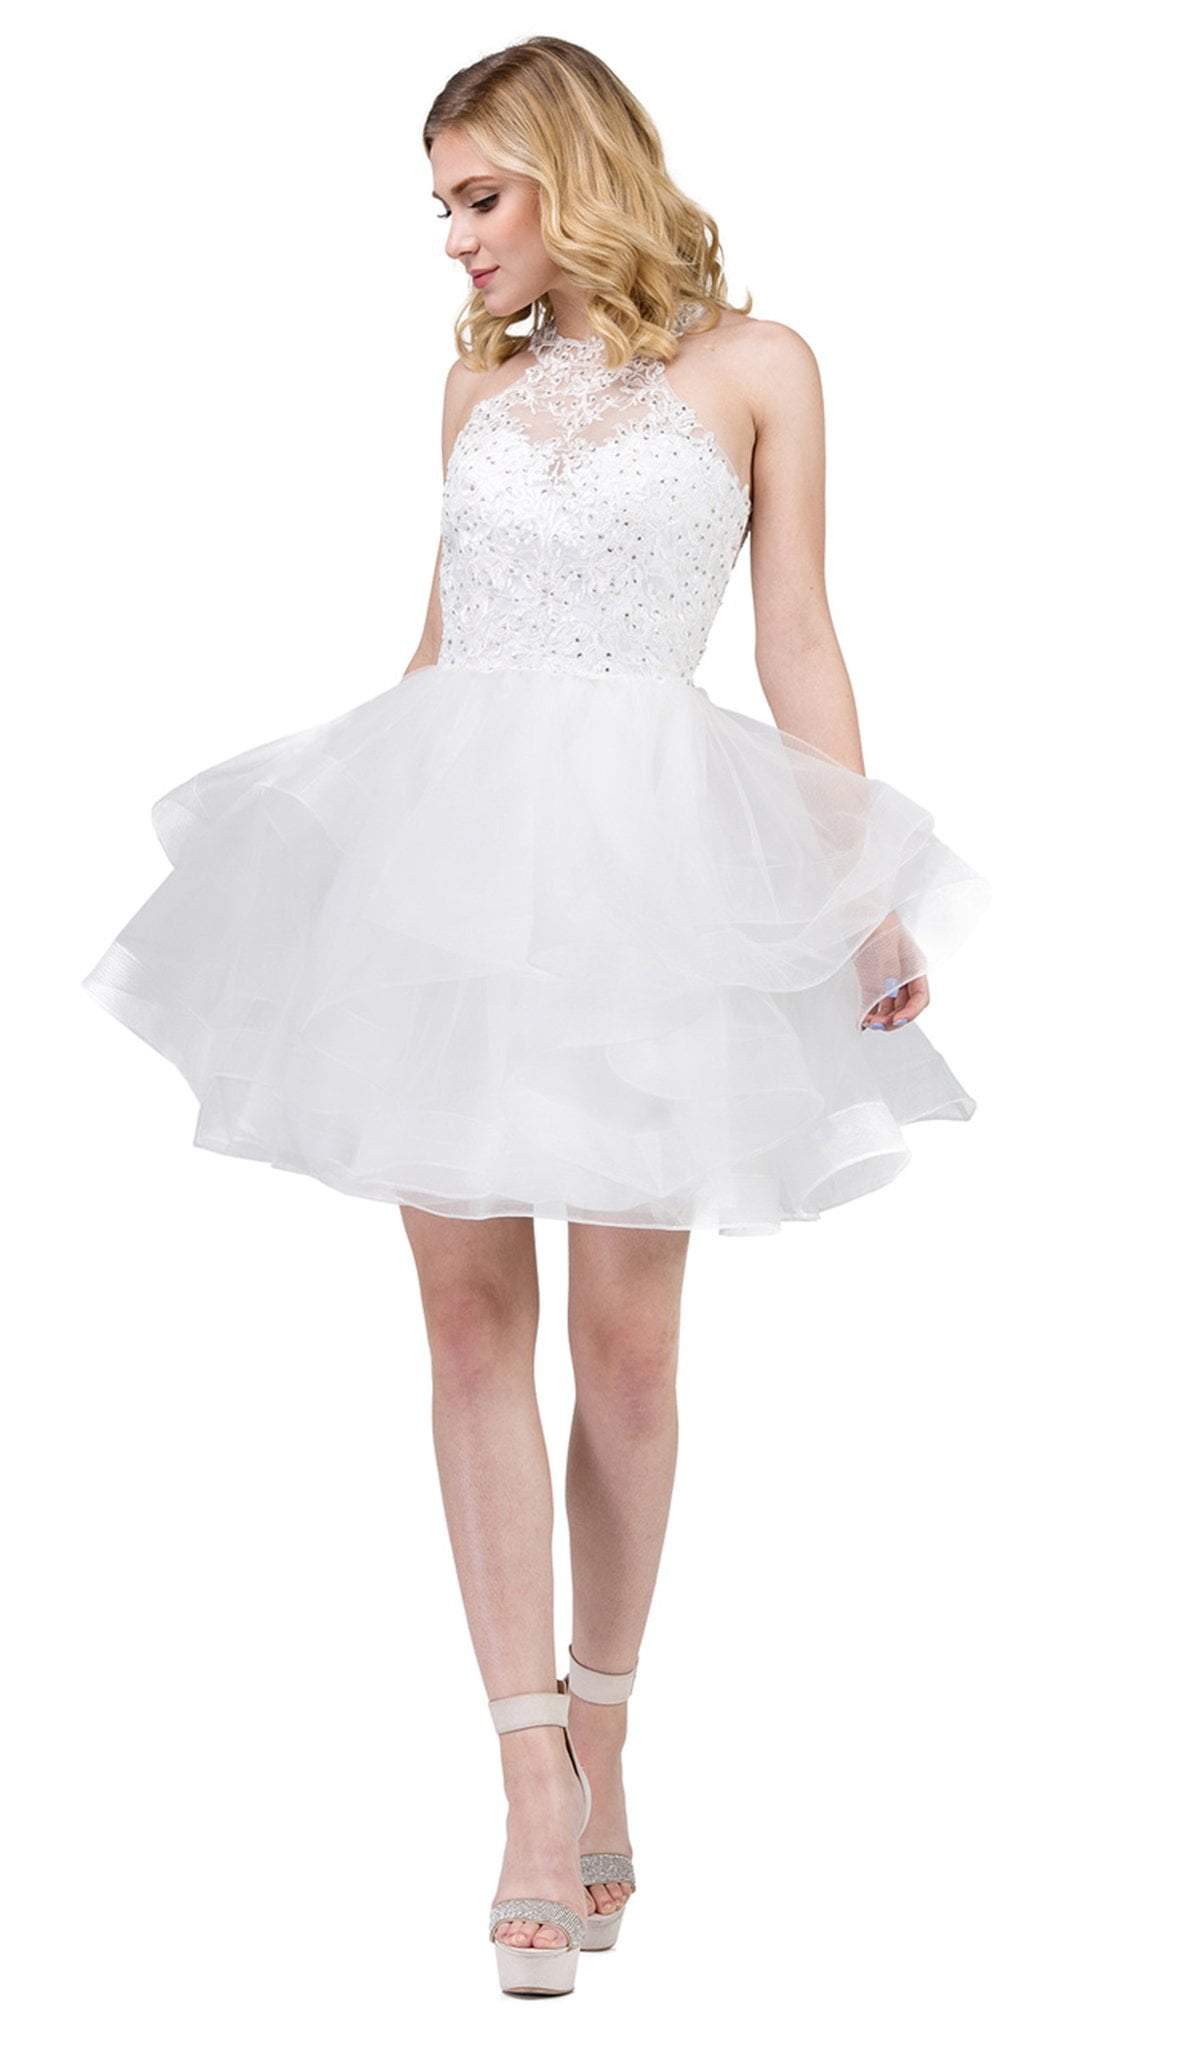 Dancing Queen - 3078 Halter Lace Top and Tulle Skirt Cocktail Dress In White